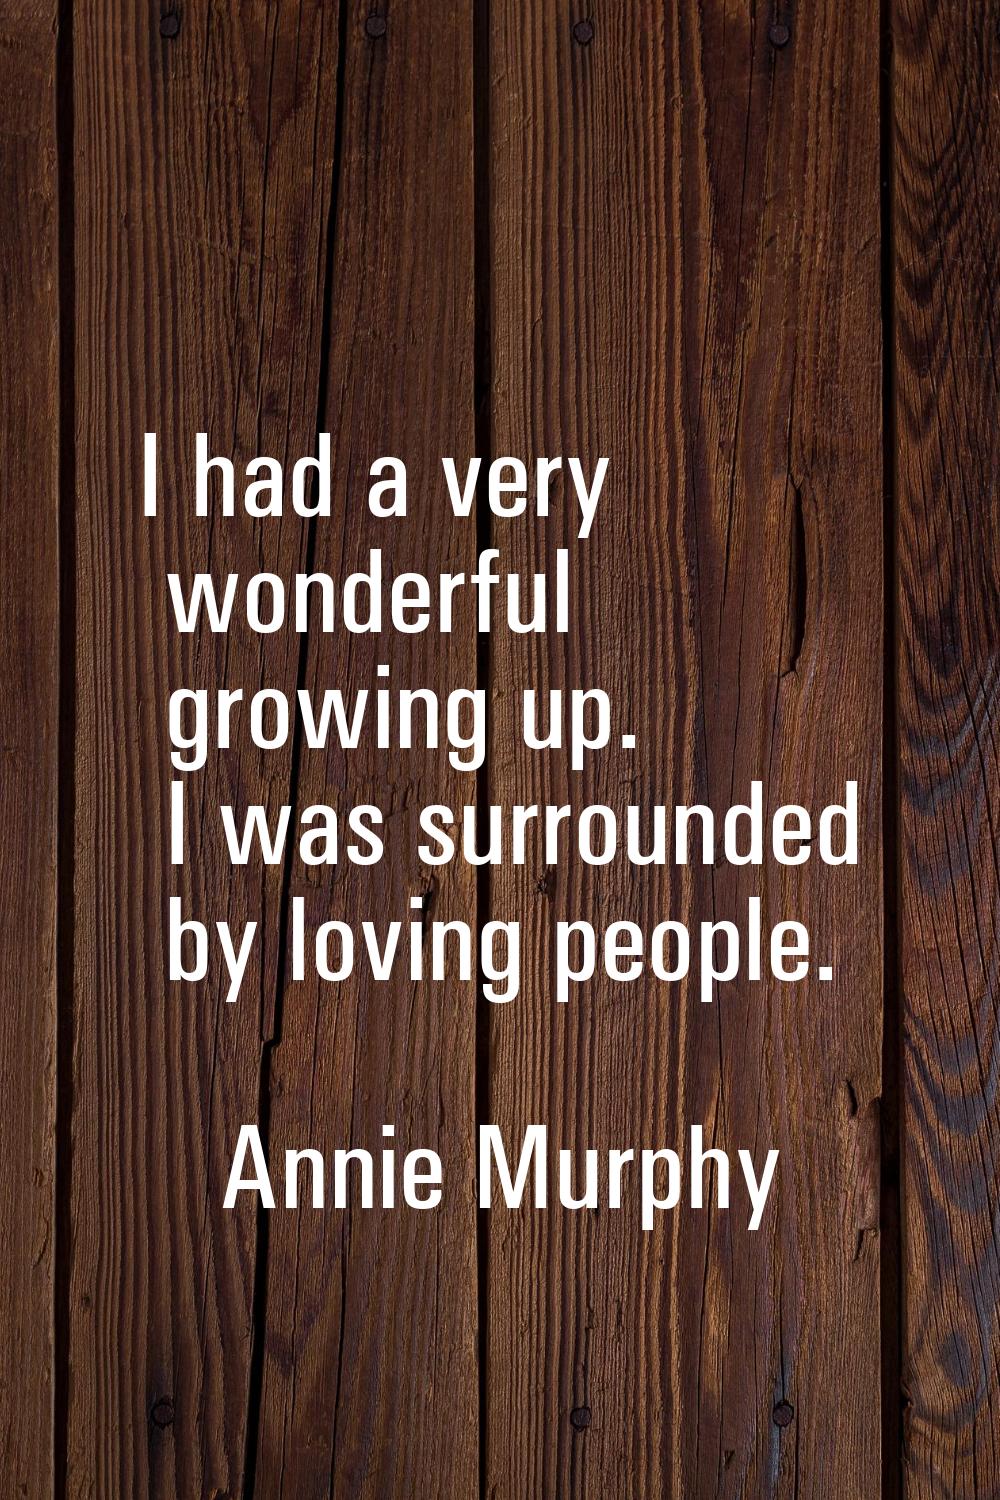 I had a very wonderful growing up. I was surrounded by loving people.